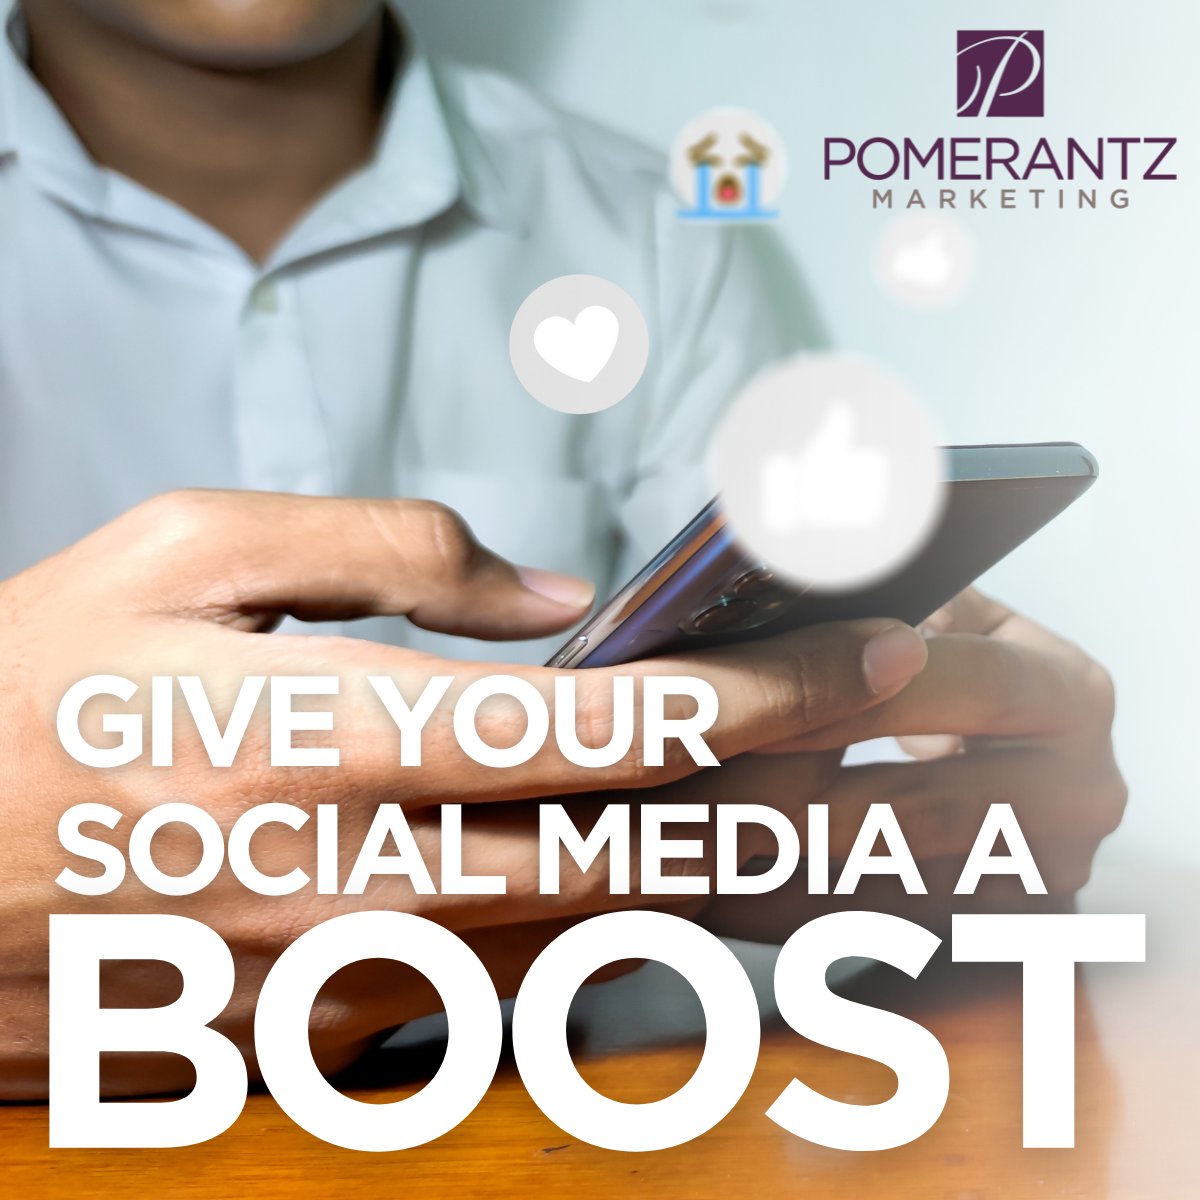 Ever stared at that #Boost button on social media and thought, 'Should I???' Boosting posts is a way to expand the reach for an organic post by pushing it out to a paid audience. Curious about the benefits of this #B2Bsocialmedia practice? Let's chat! pomagency.com